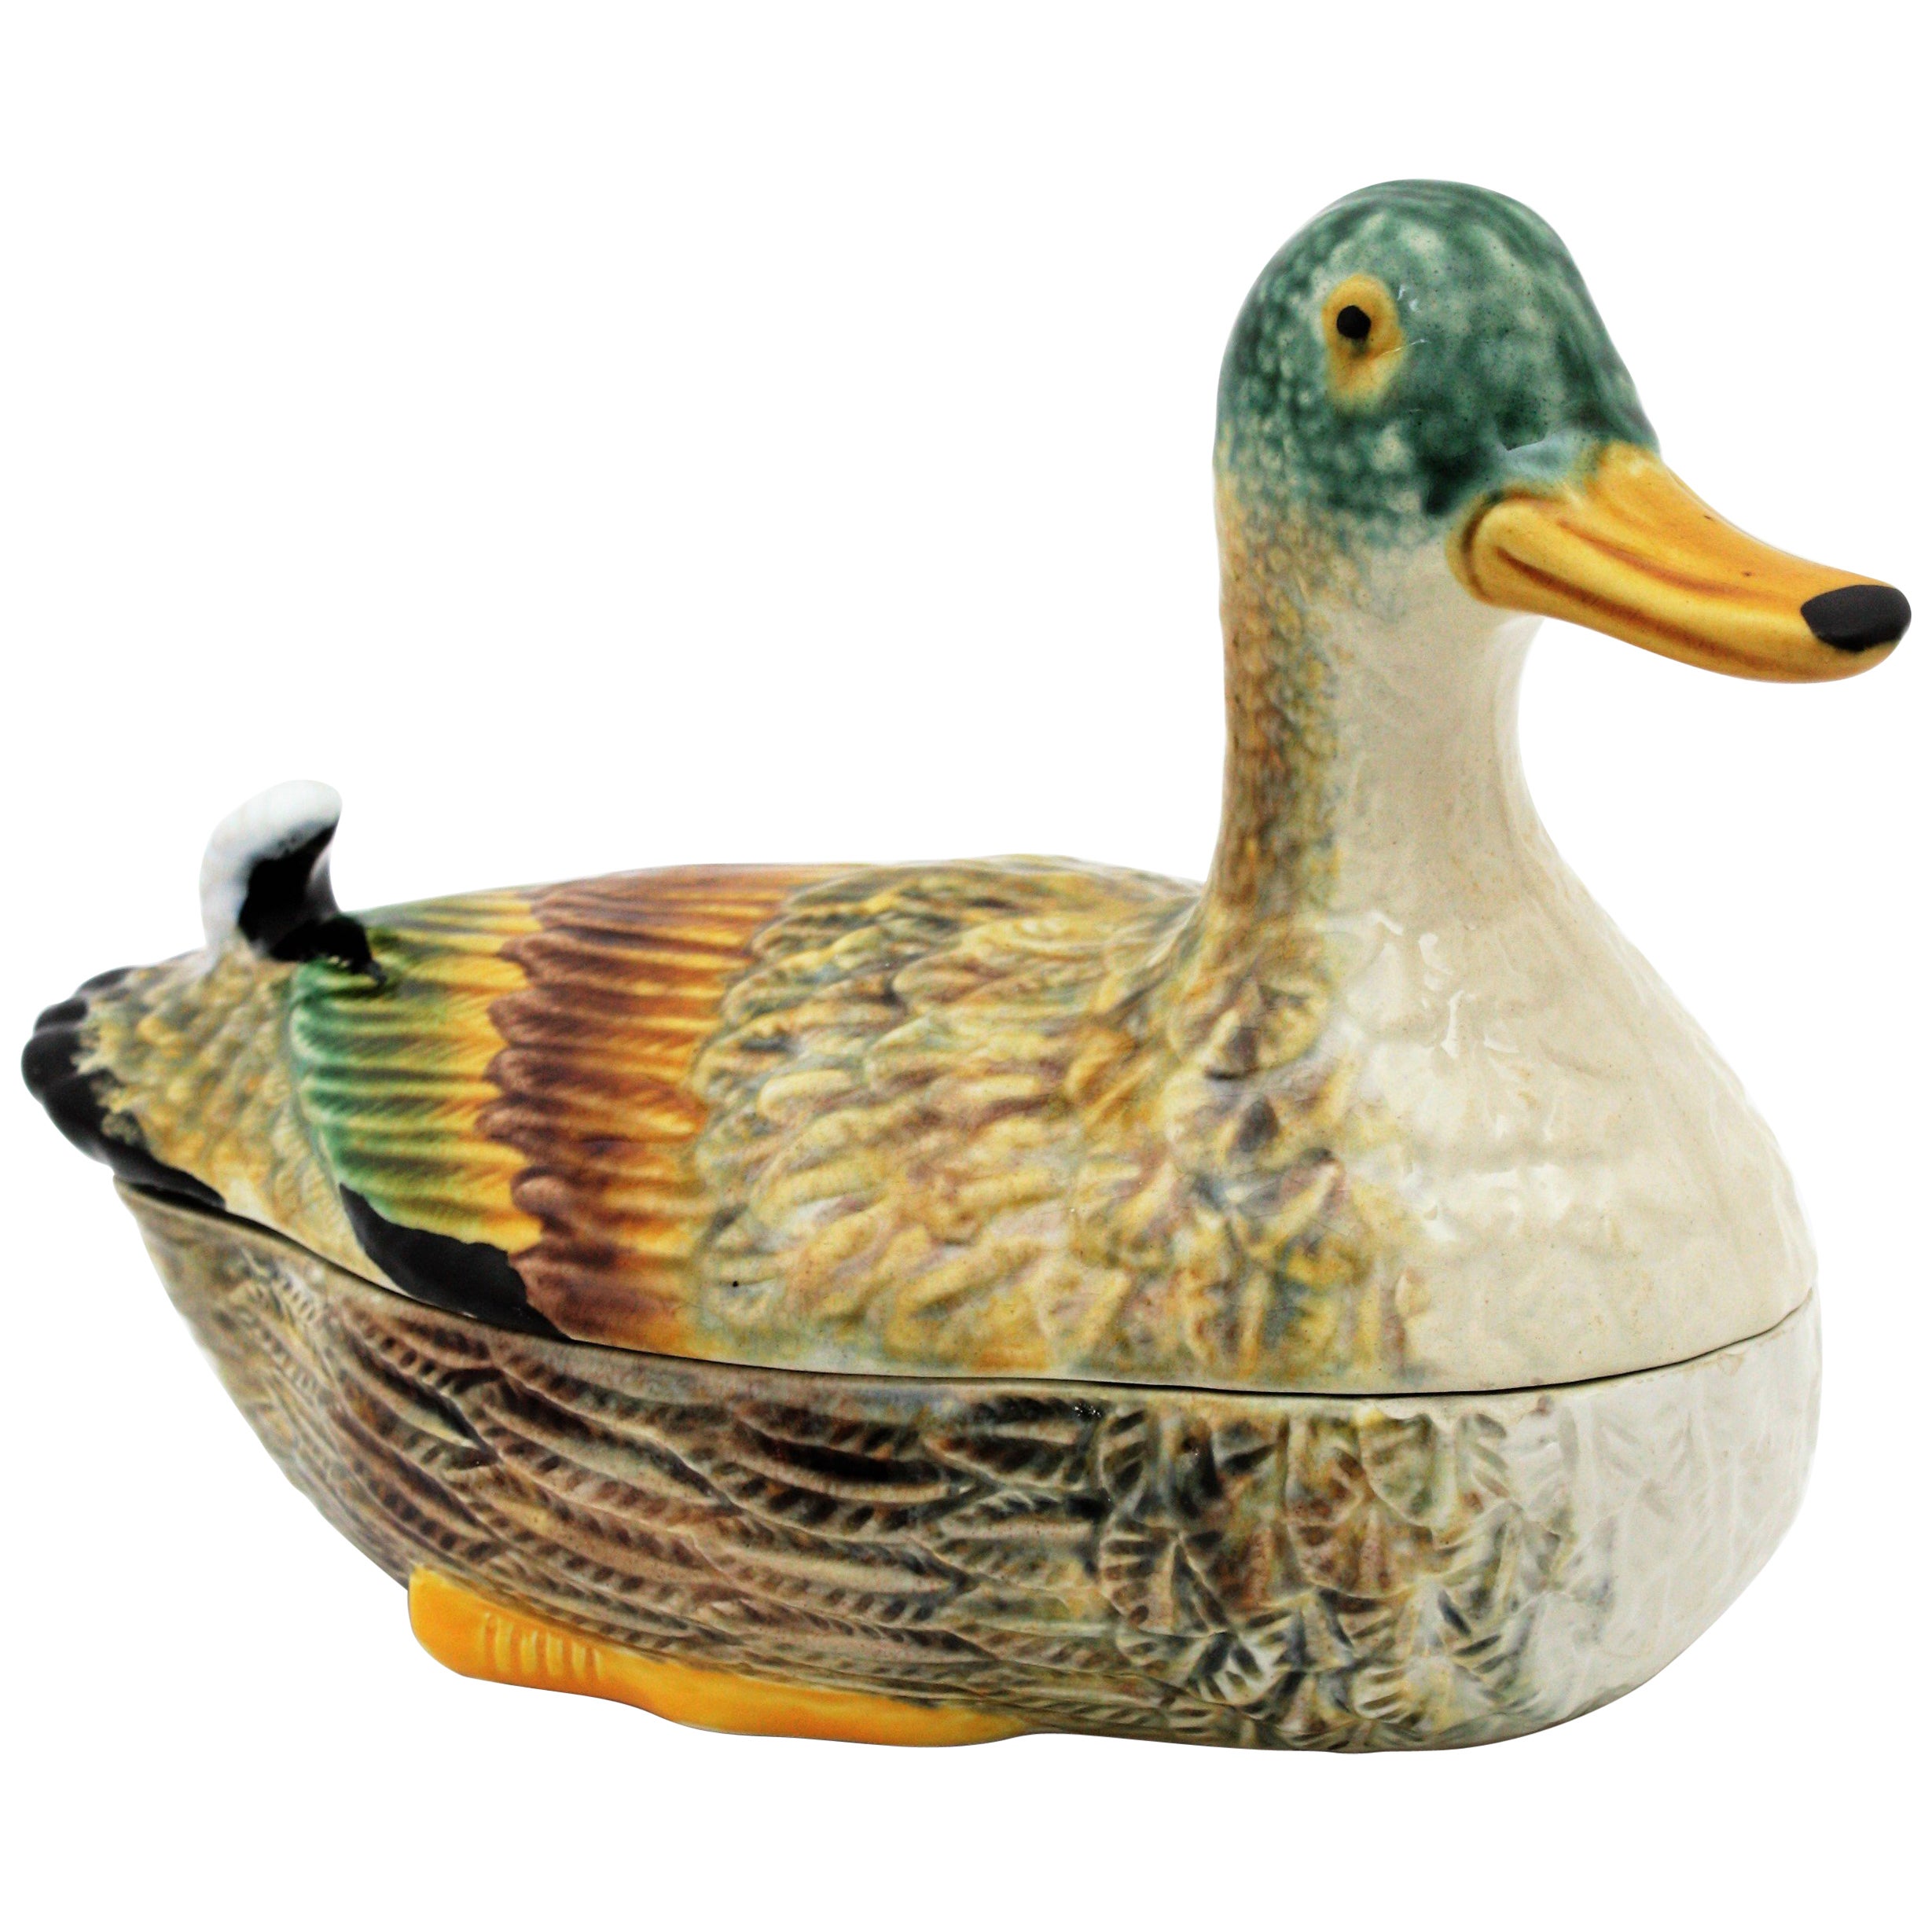 A cool majolica glazed ceramic duck figure tureen in brown and cream colors with accents of black, green and yellow. Portugal, 1960s.
Manufactured by E.Subtil Portugal and marked on the base.
Use it to serve duck foie gras or as candy or chocolates